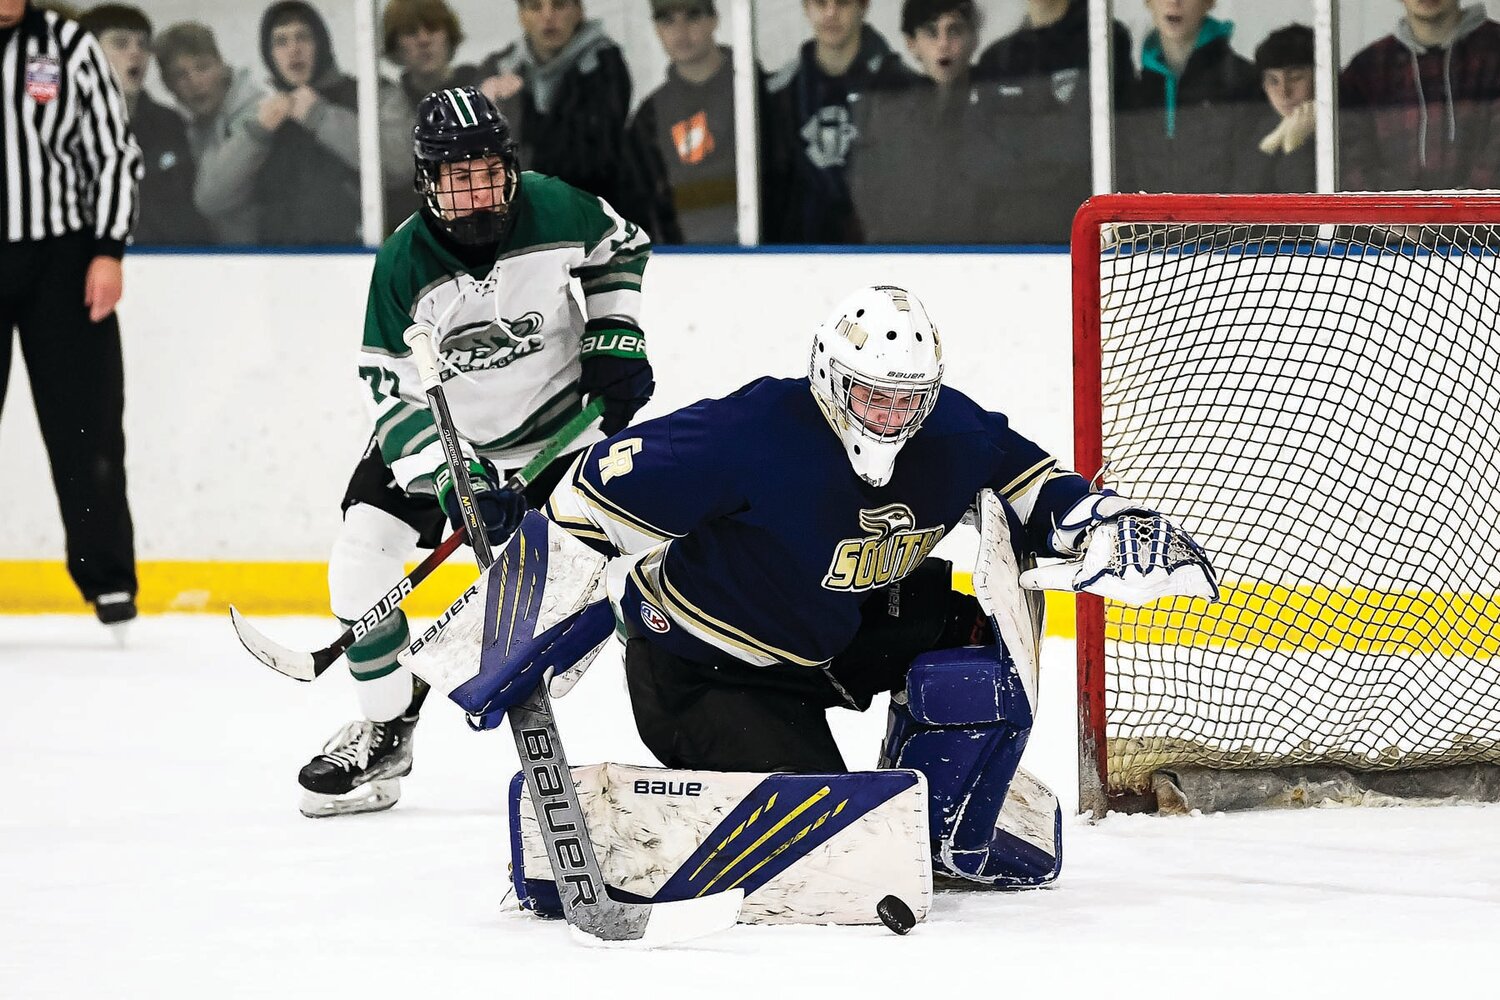 Council Rock South goalie Trevor Rakszawski  scrambles to gather a loose puck in front of the net as Pennridge’s Andrew Savona closes in.